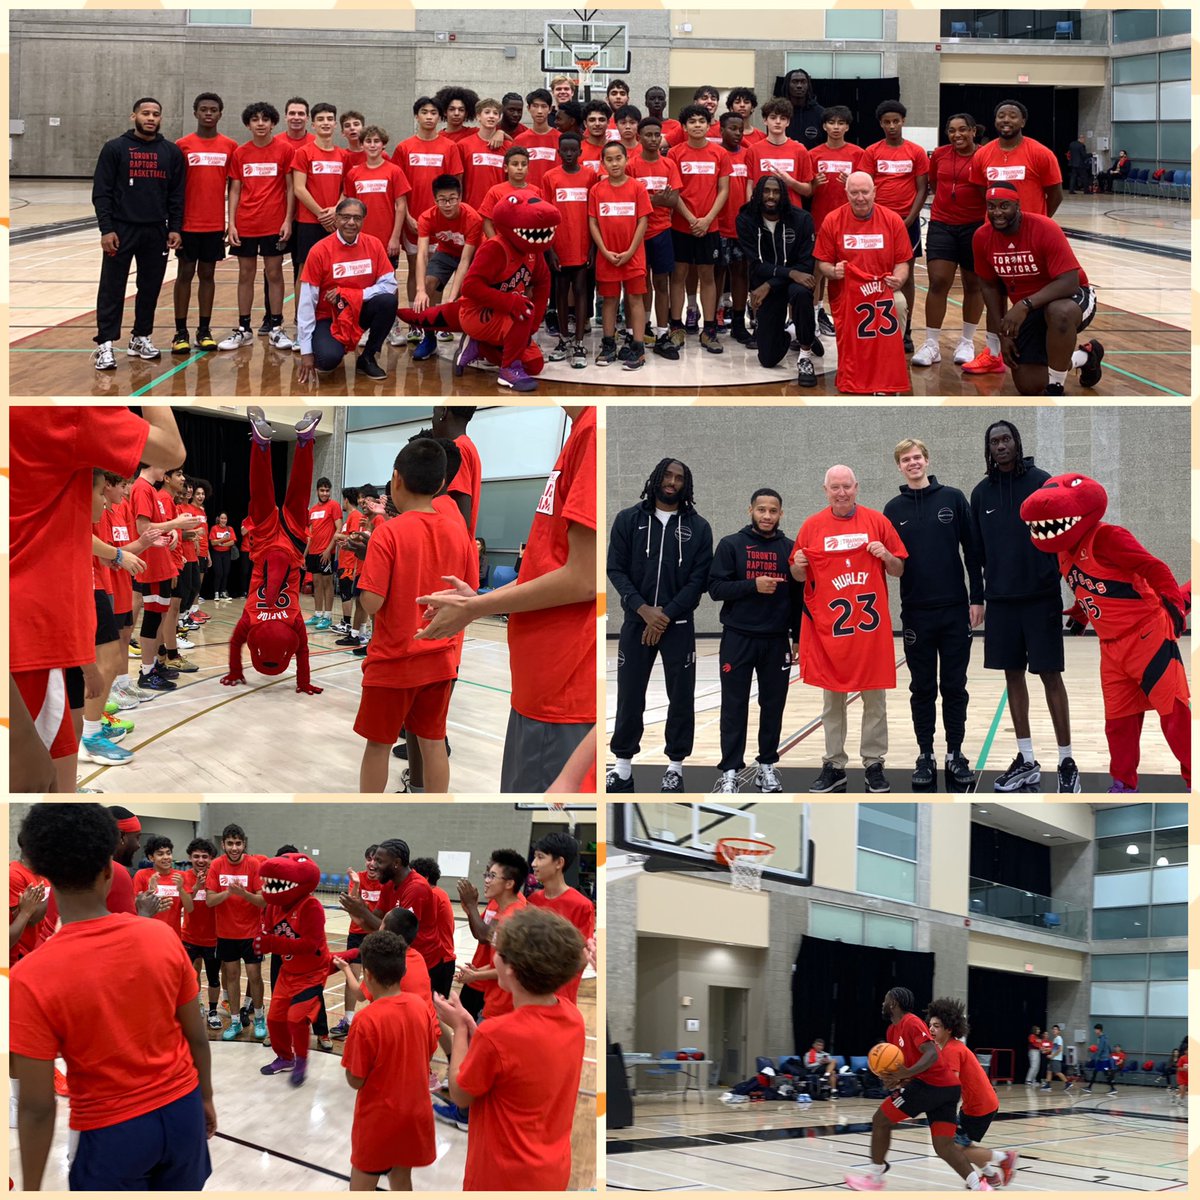 Great to have the @raptors in Burnaby for their annual training camp! Thanks for taking time out to run drills with our Burnaby youths tonight! 👍 Best of luck to all of you and have a great season! 🏀